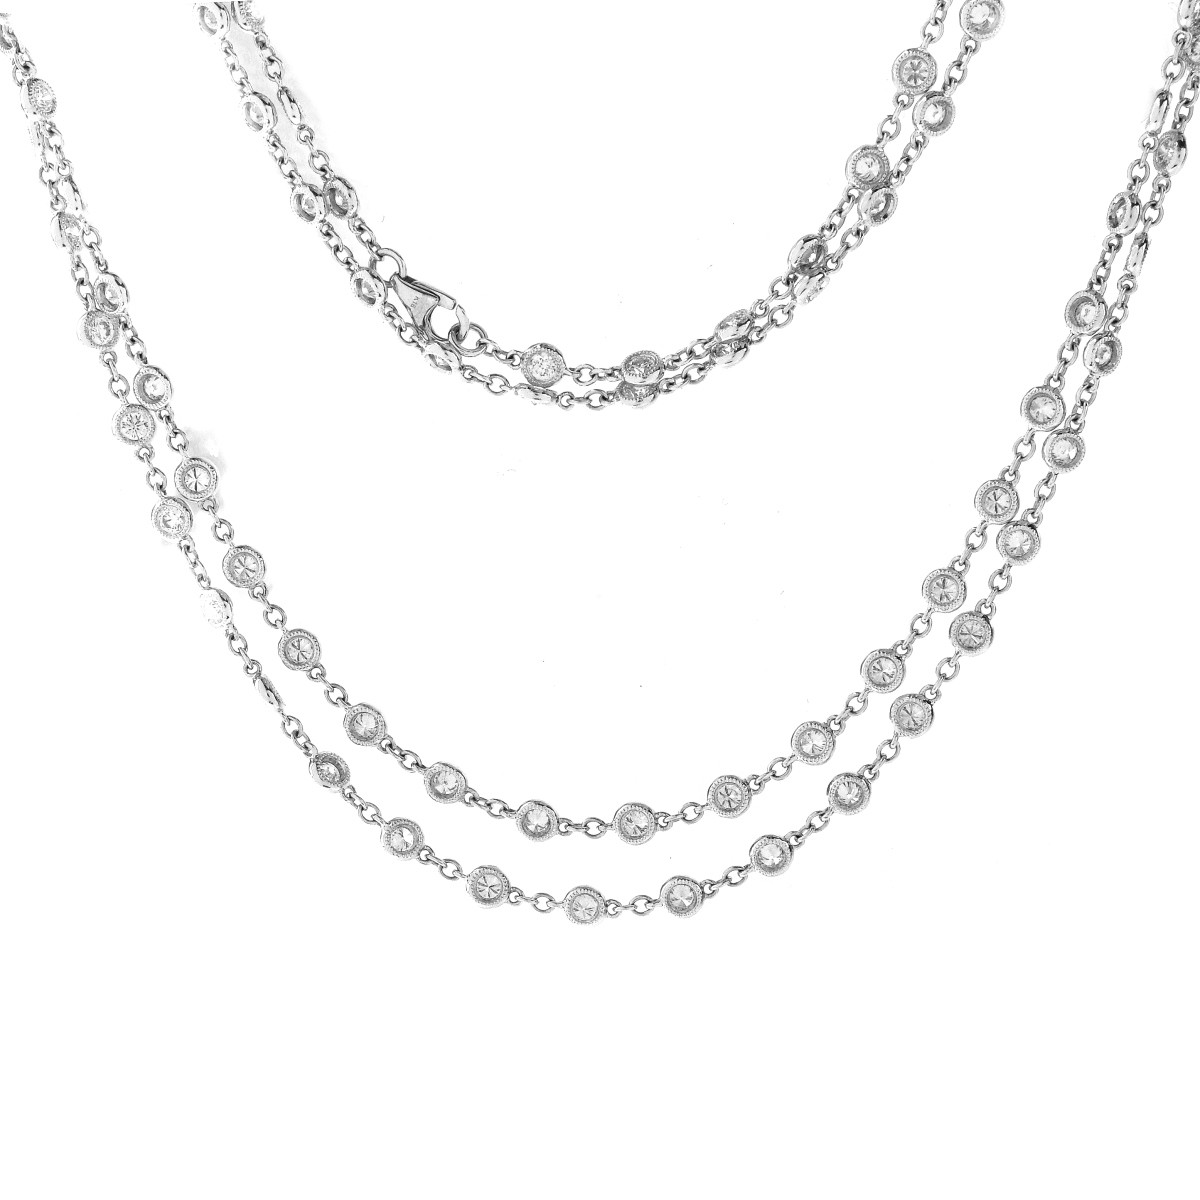 Tiffany style Diamond and 18K Gold Necklace